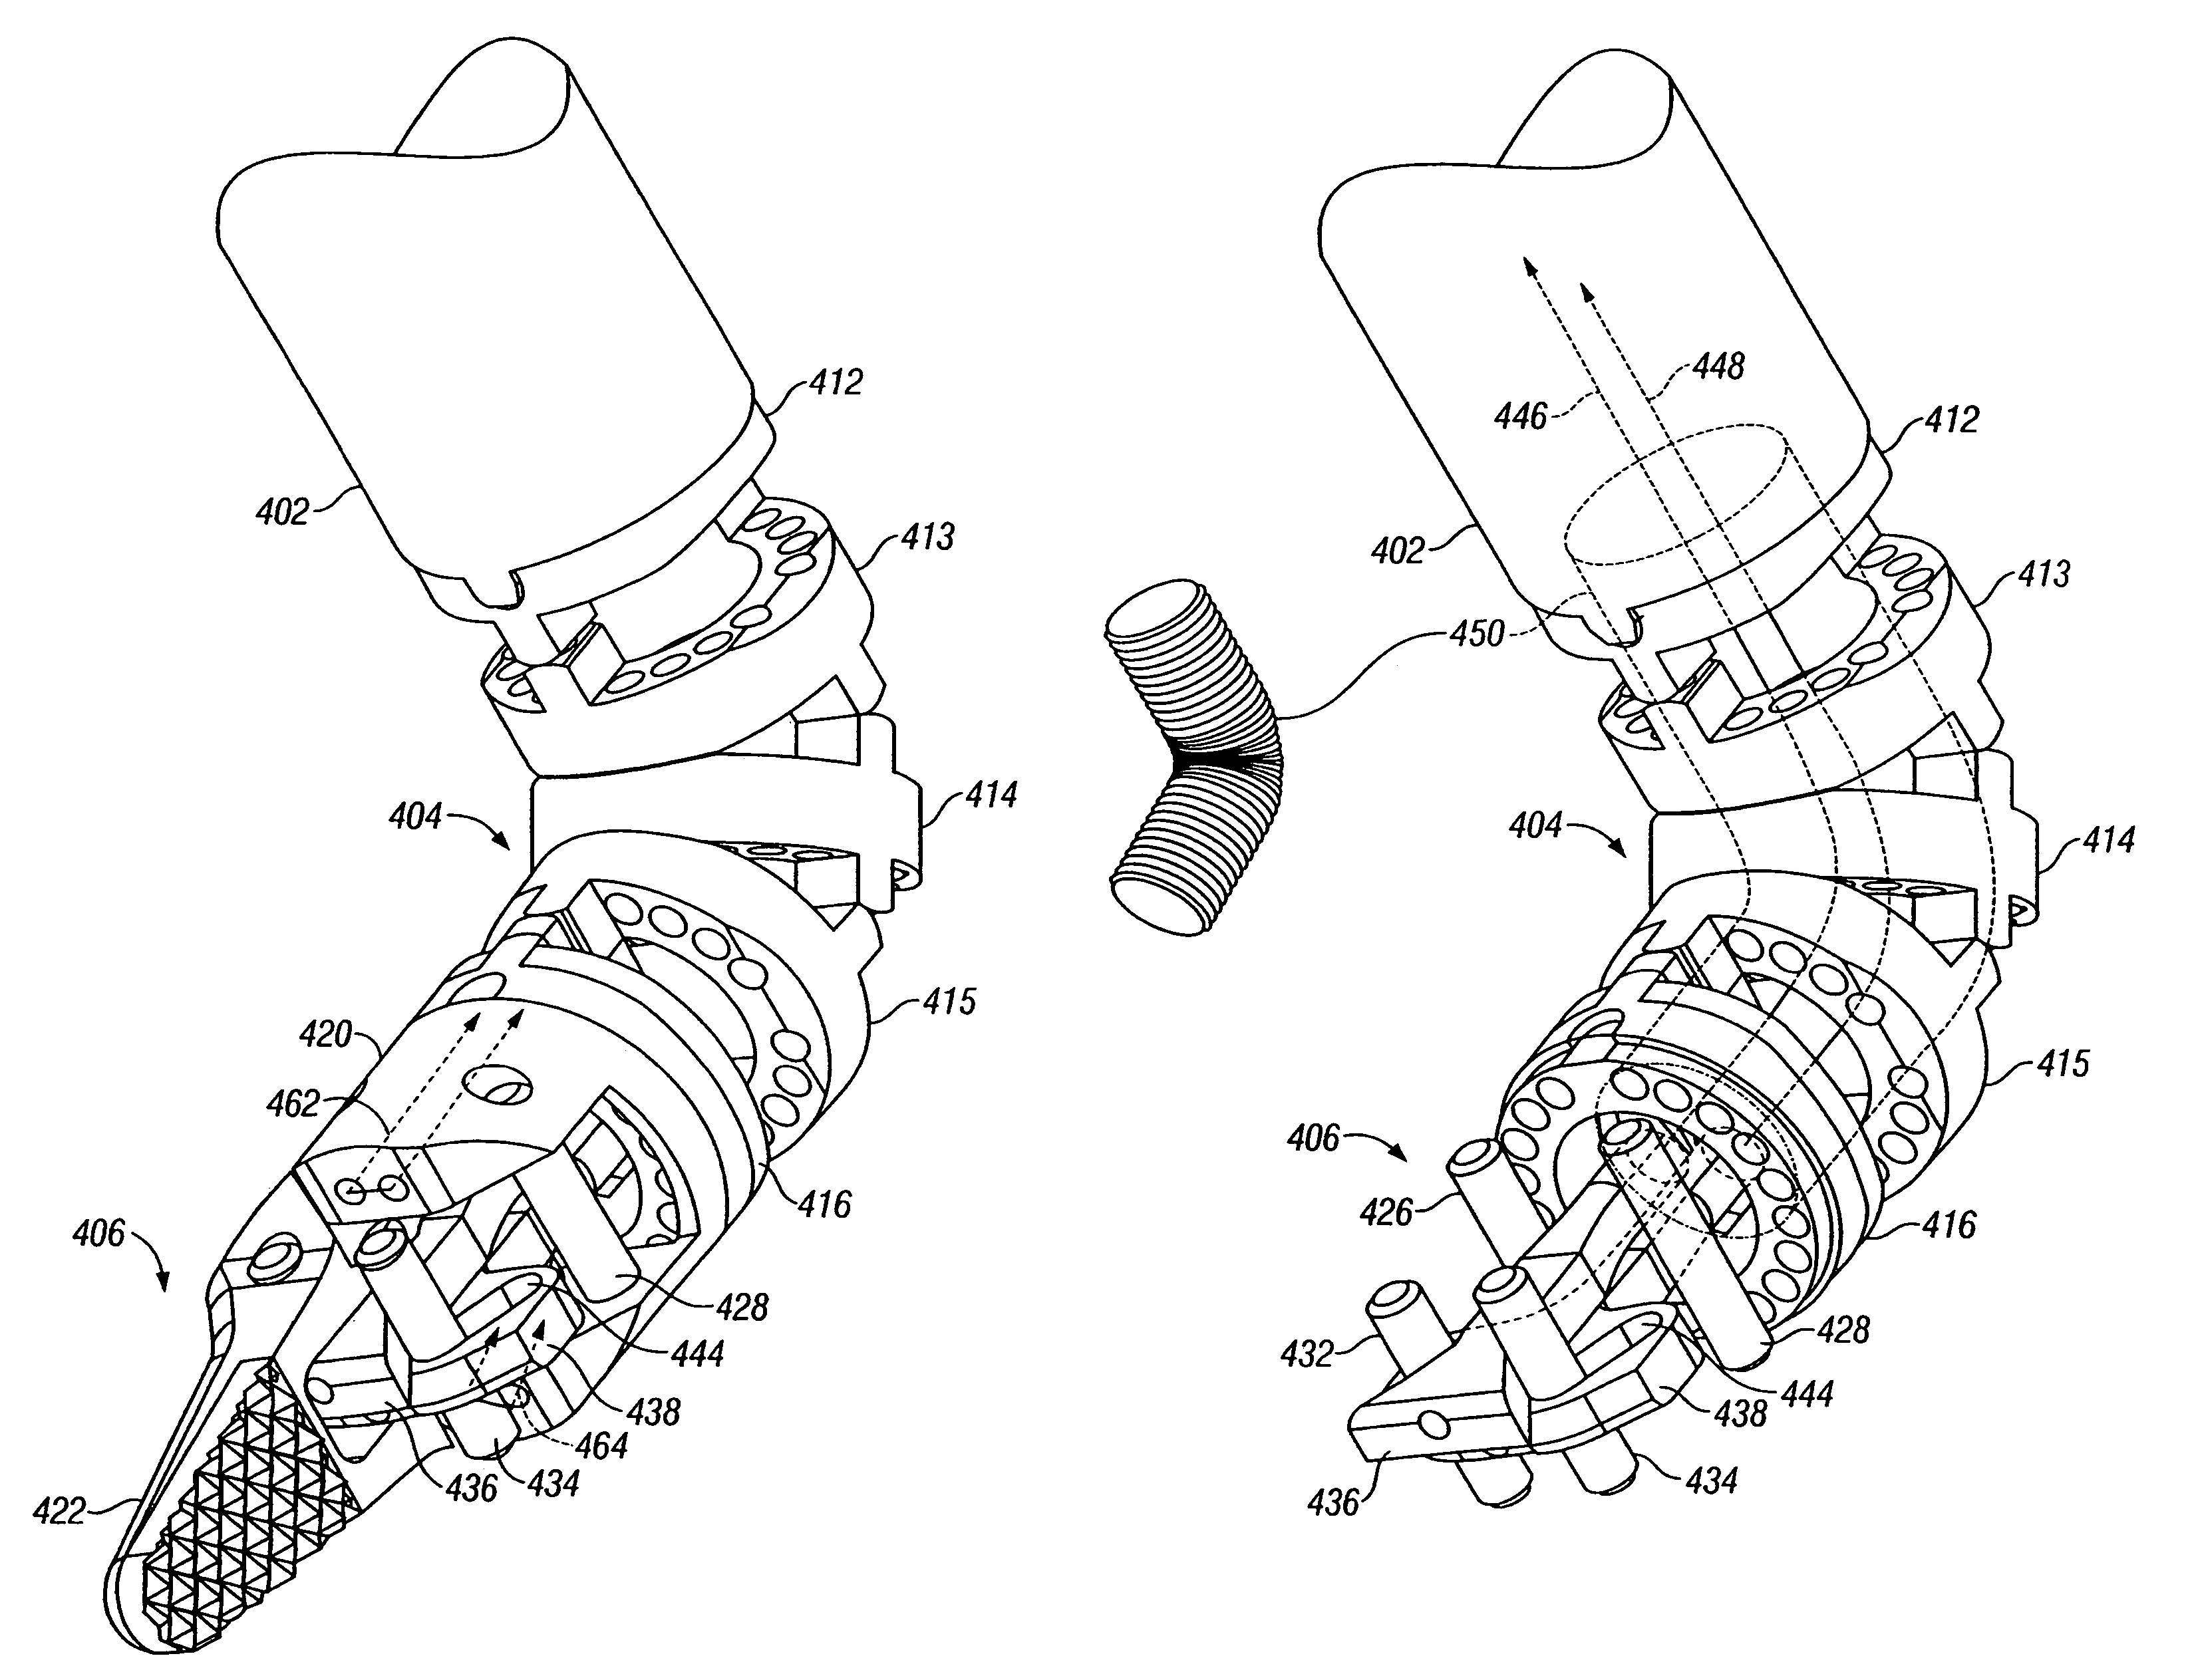 Surgical tool having positively positionable tendon-actuated multi-disk wrist joint